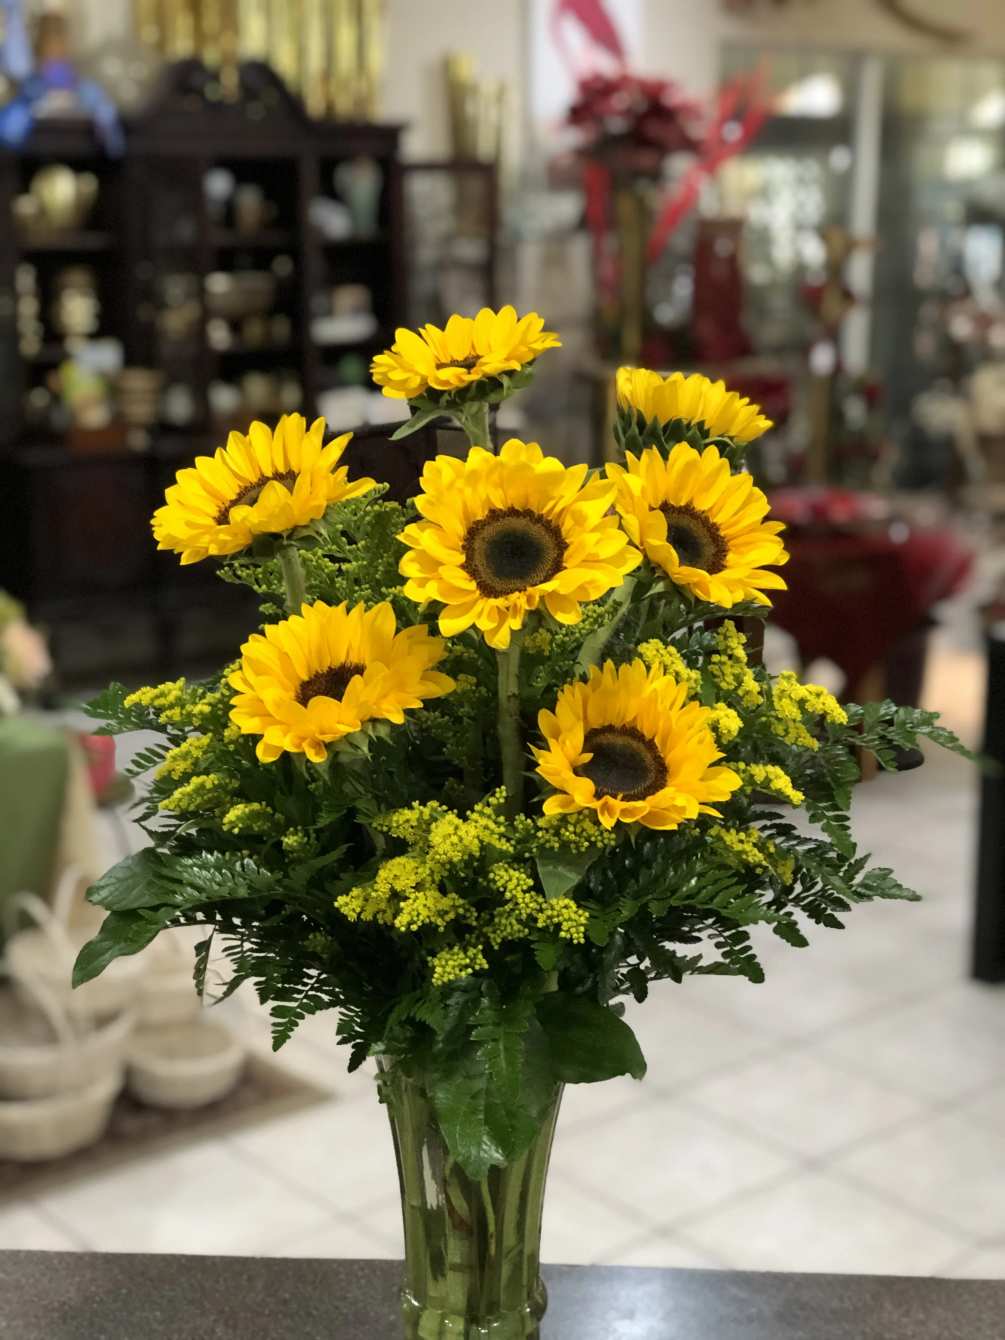 A beautiful vase of glorious sunflowers that is sure to do Vincent